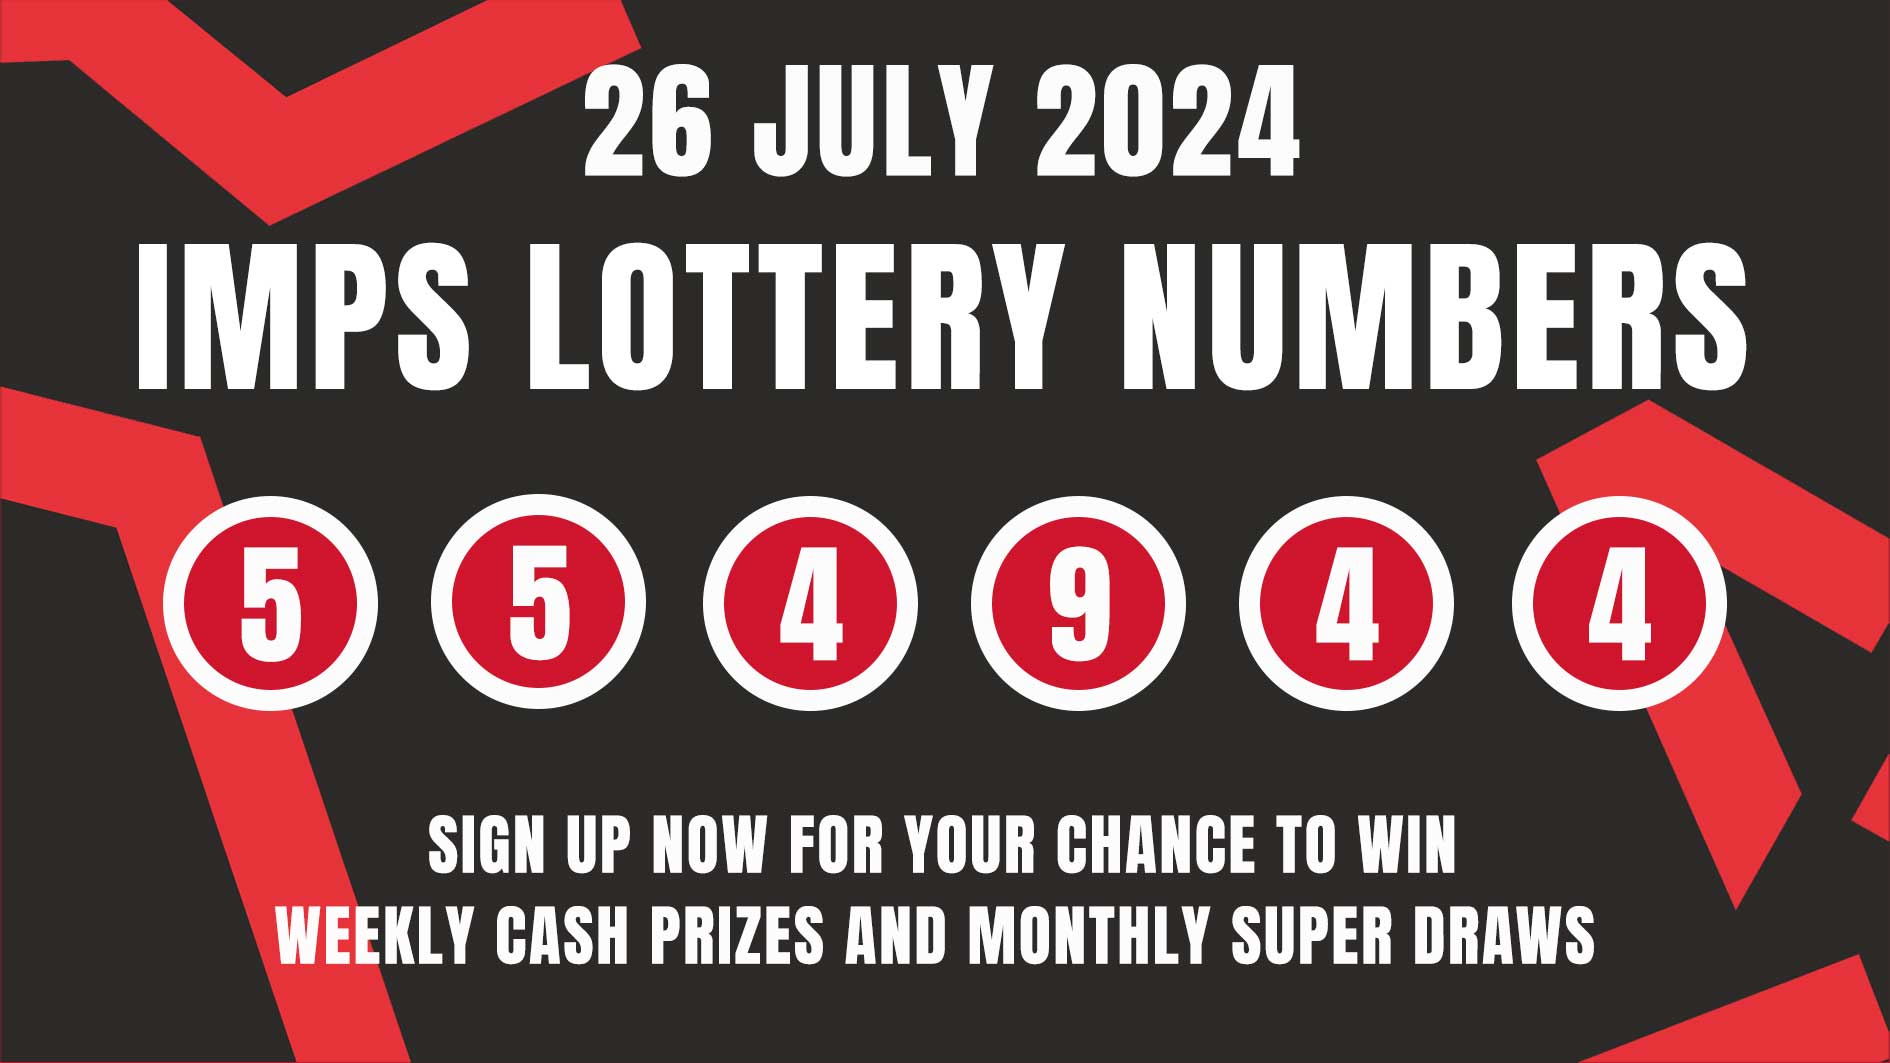 Imps Lottery - 554944